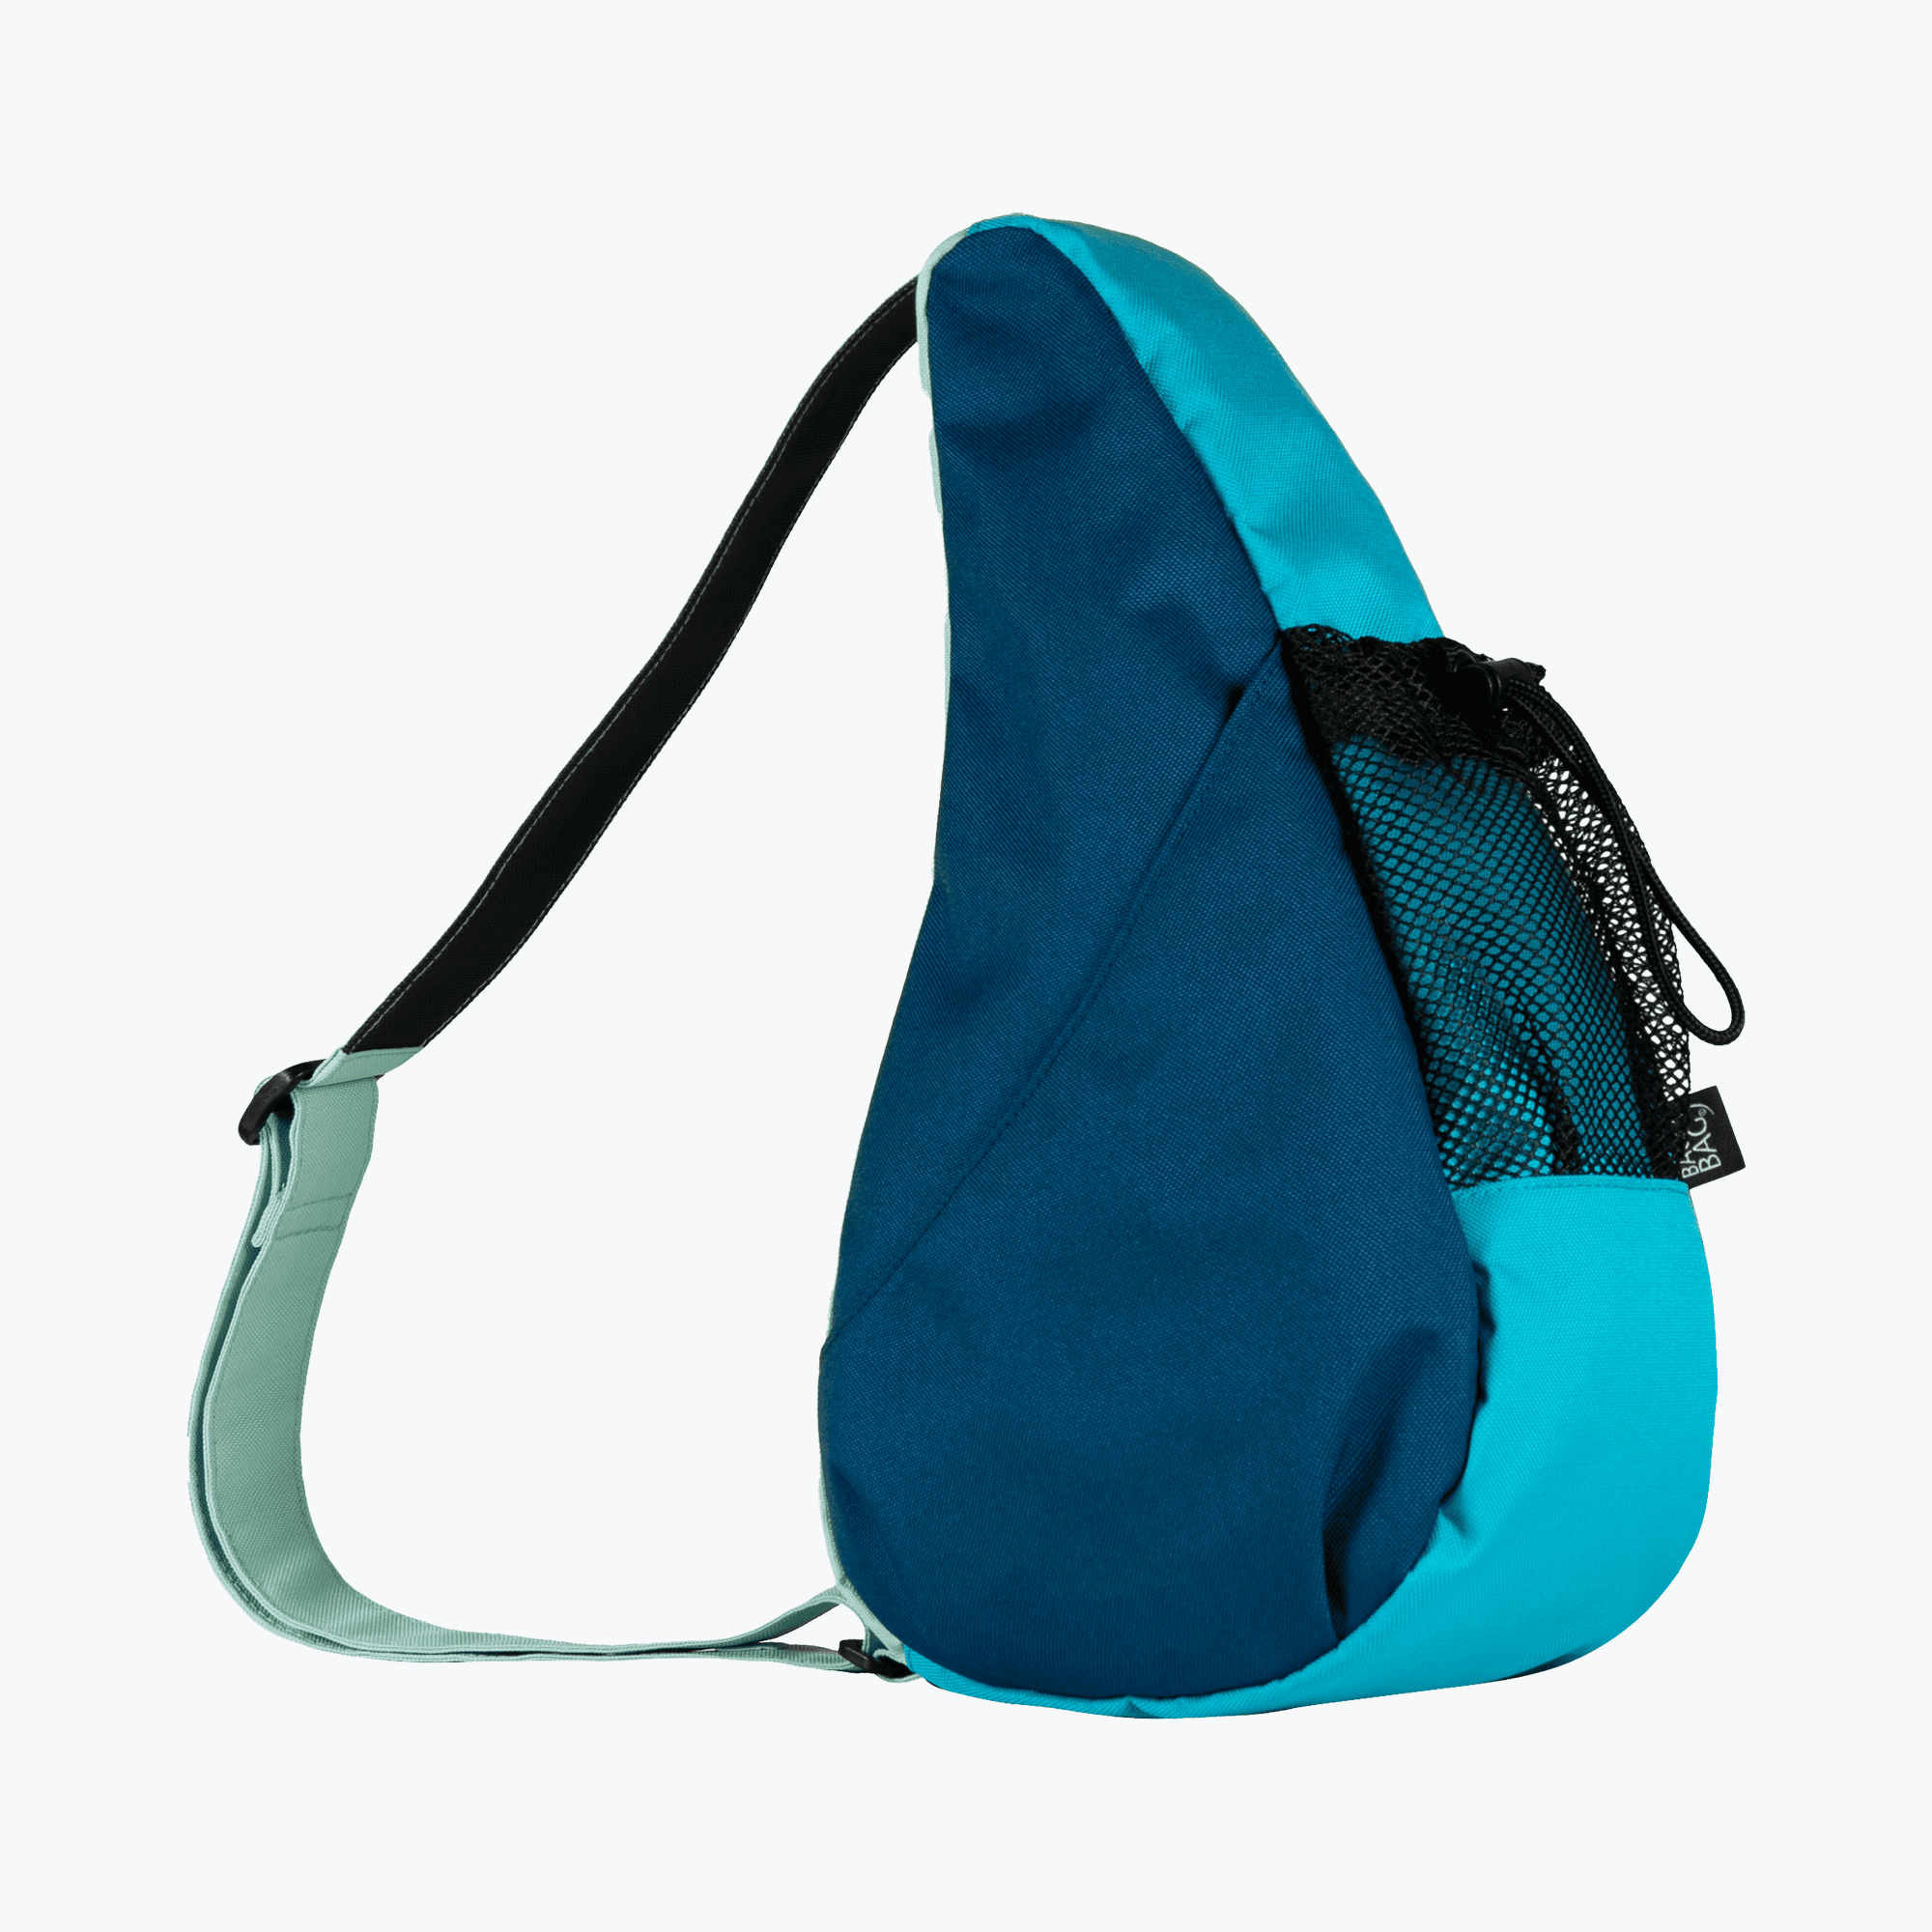 Latest Arrivals by The Healthy Back Bag